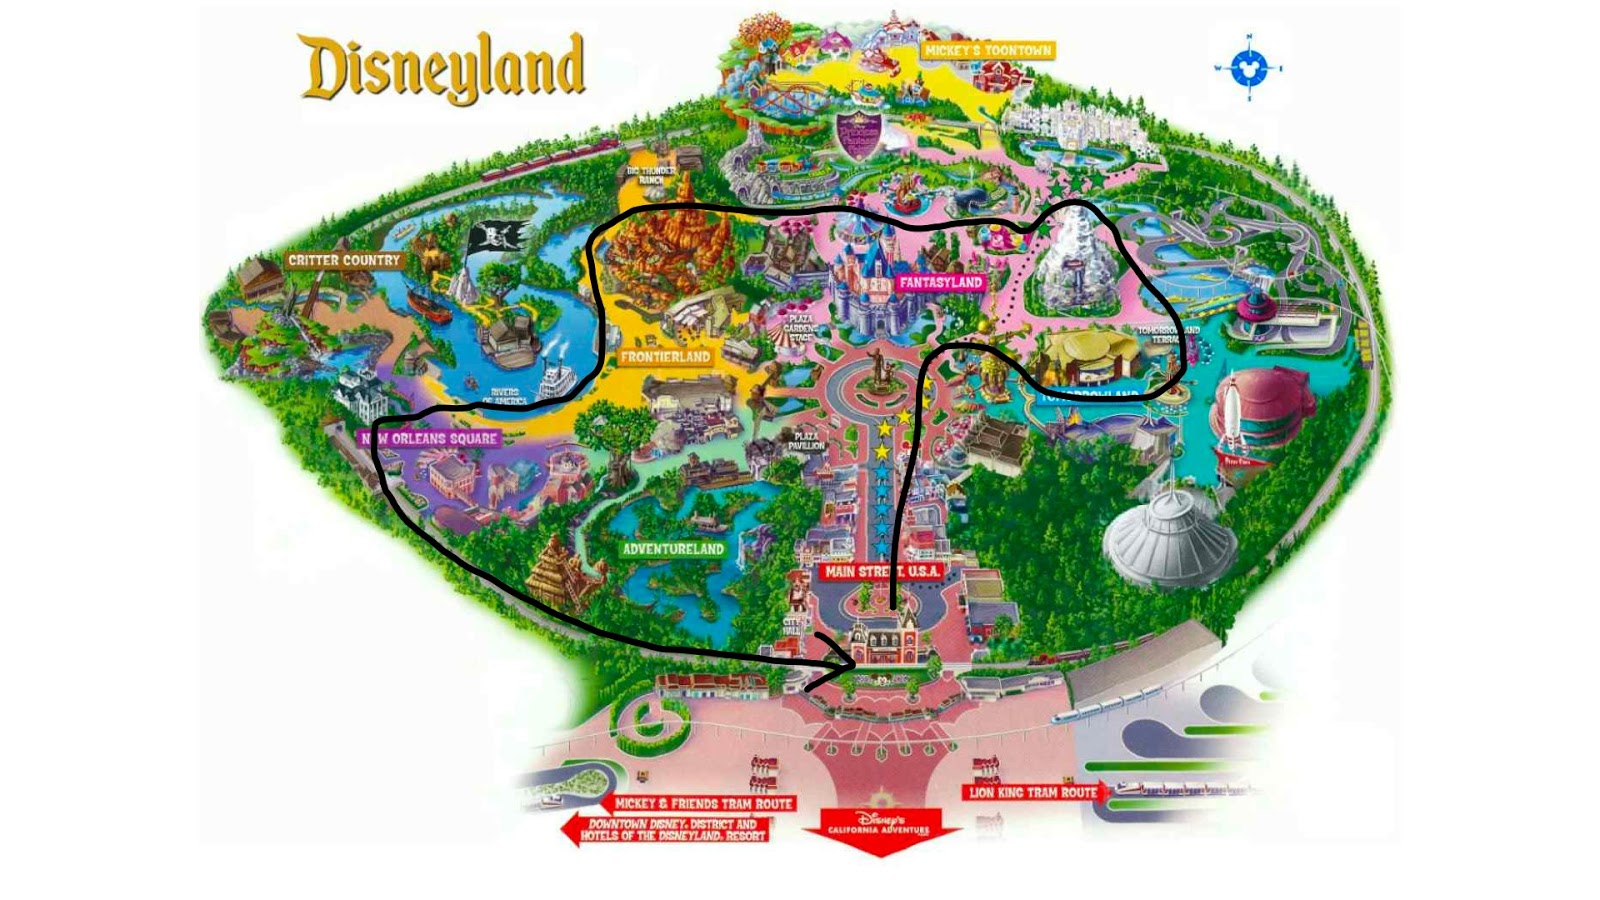 An image of Disneyland with a predetermined, one-size-fits-all schedule and route through the park